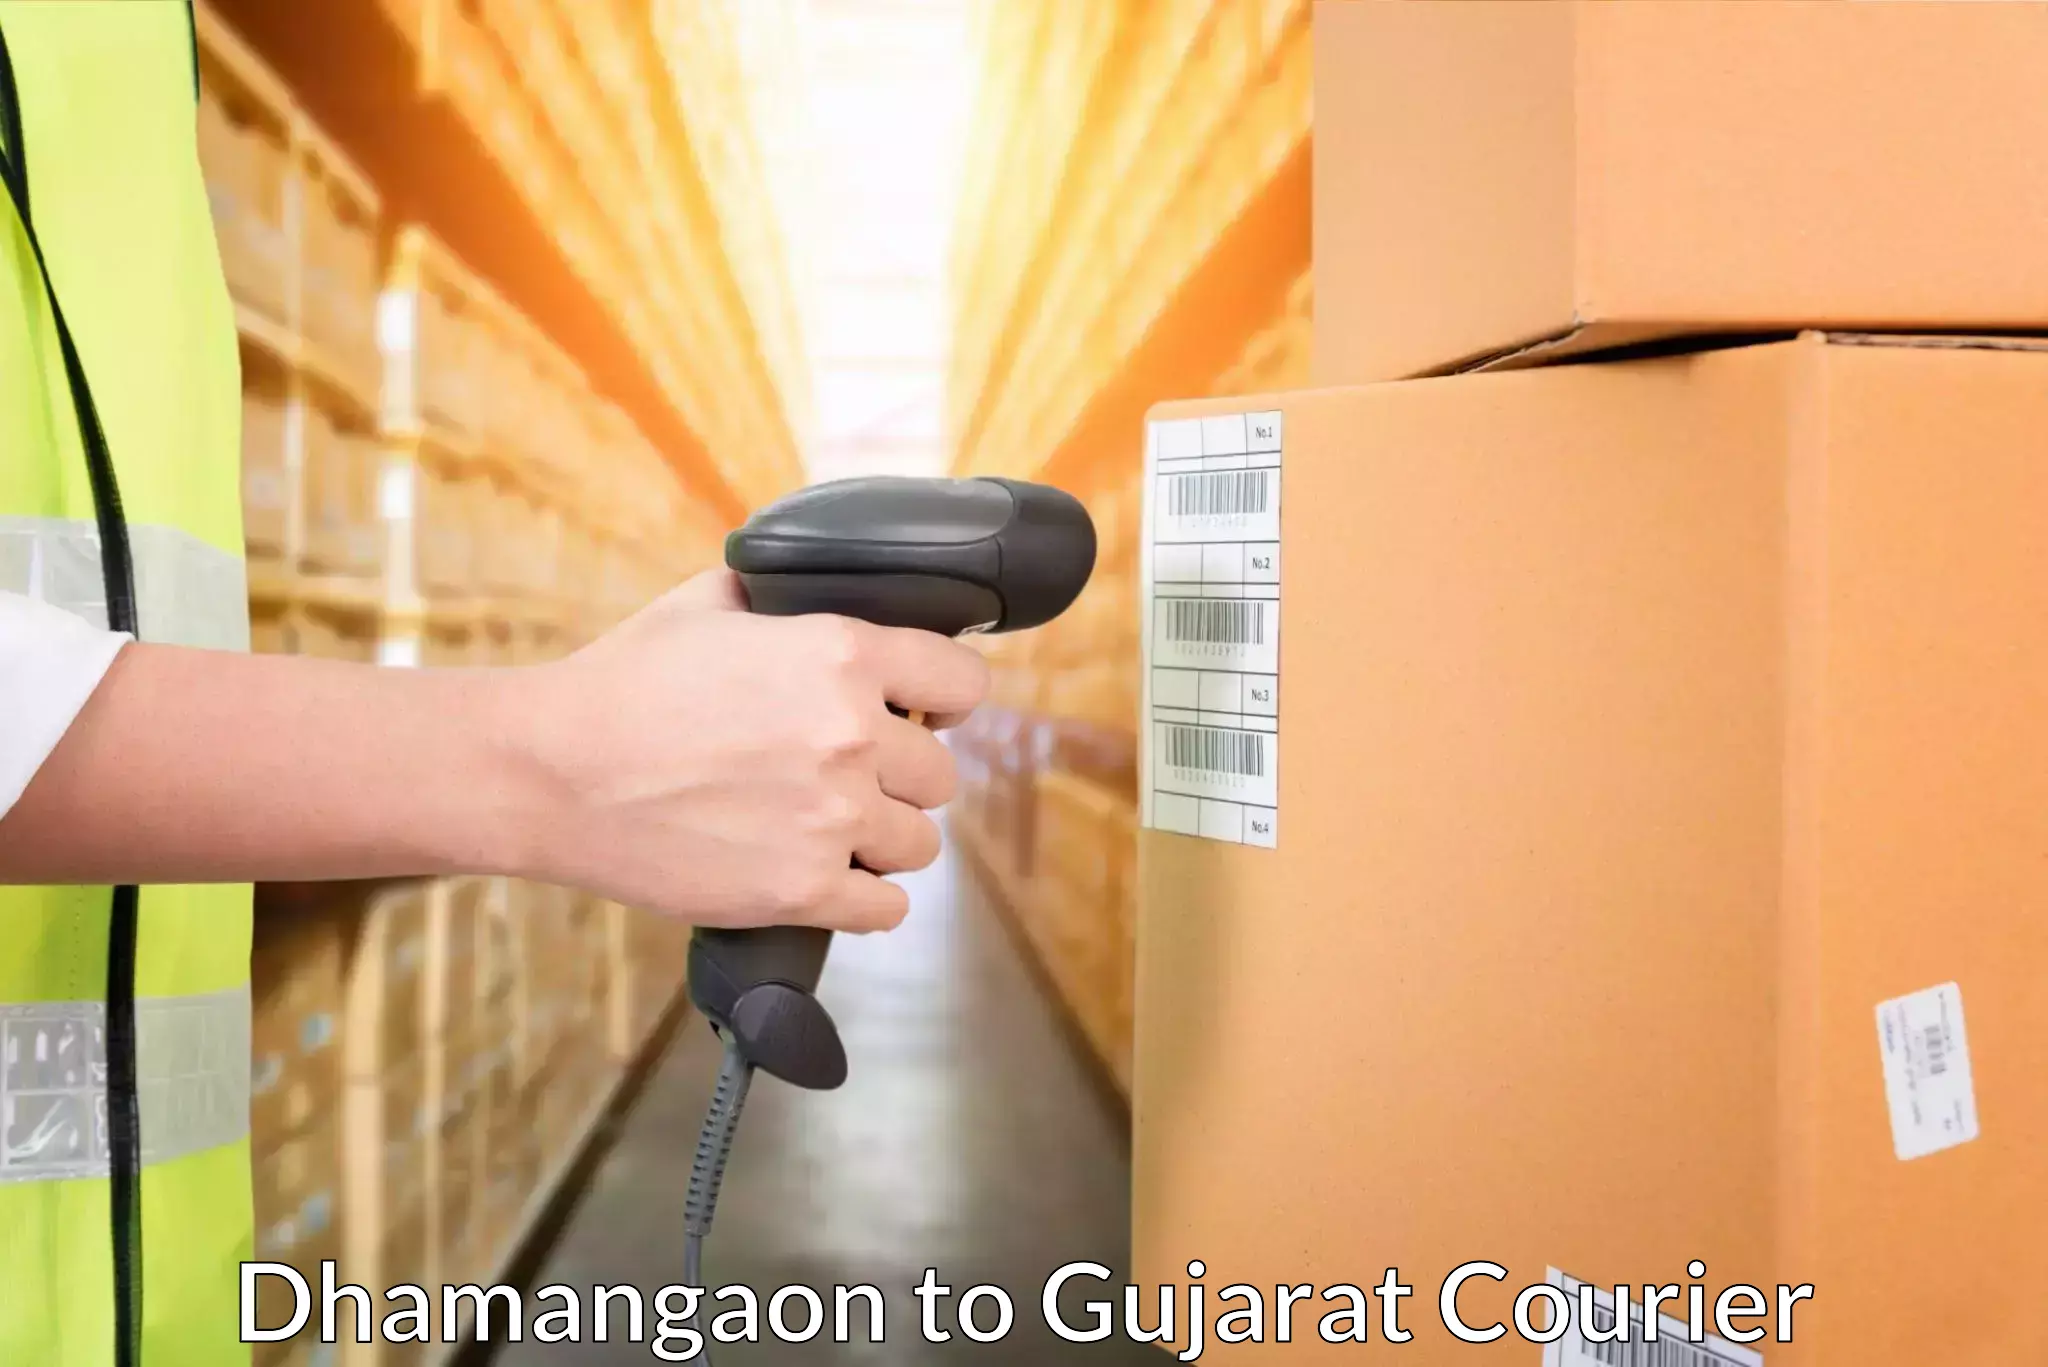 Courier app Dhamangaon to Gujarat